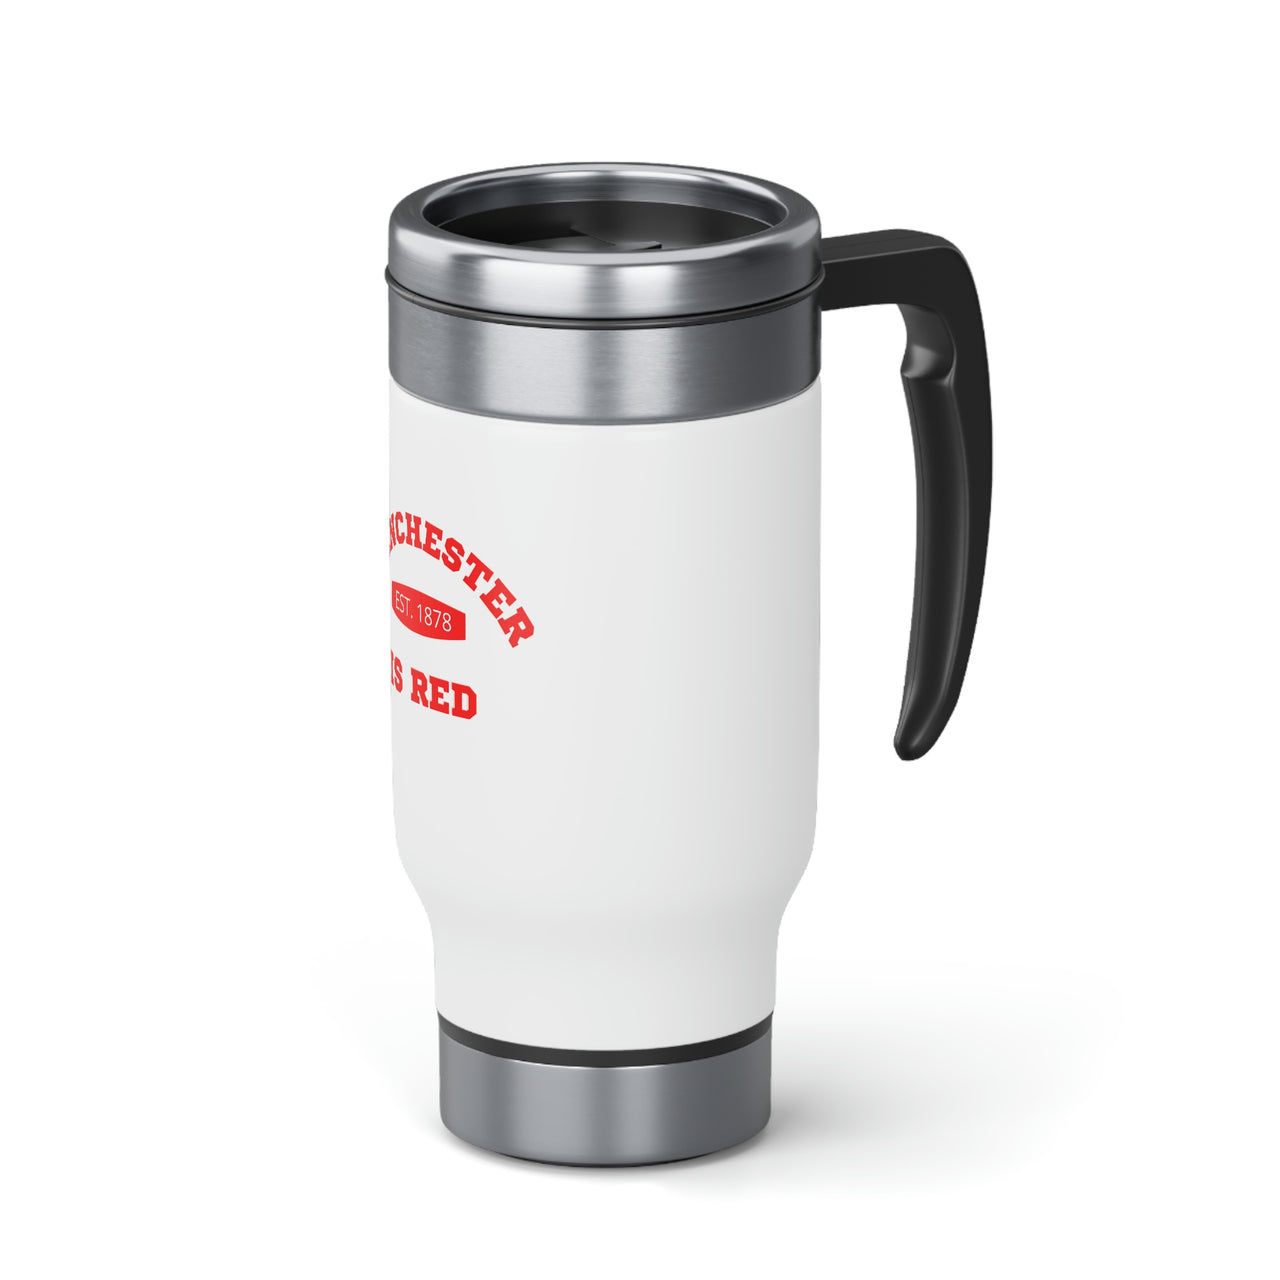 Manchester United Stainless Steel Travel Mug with Handle, 14oz